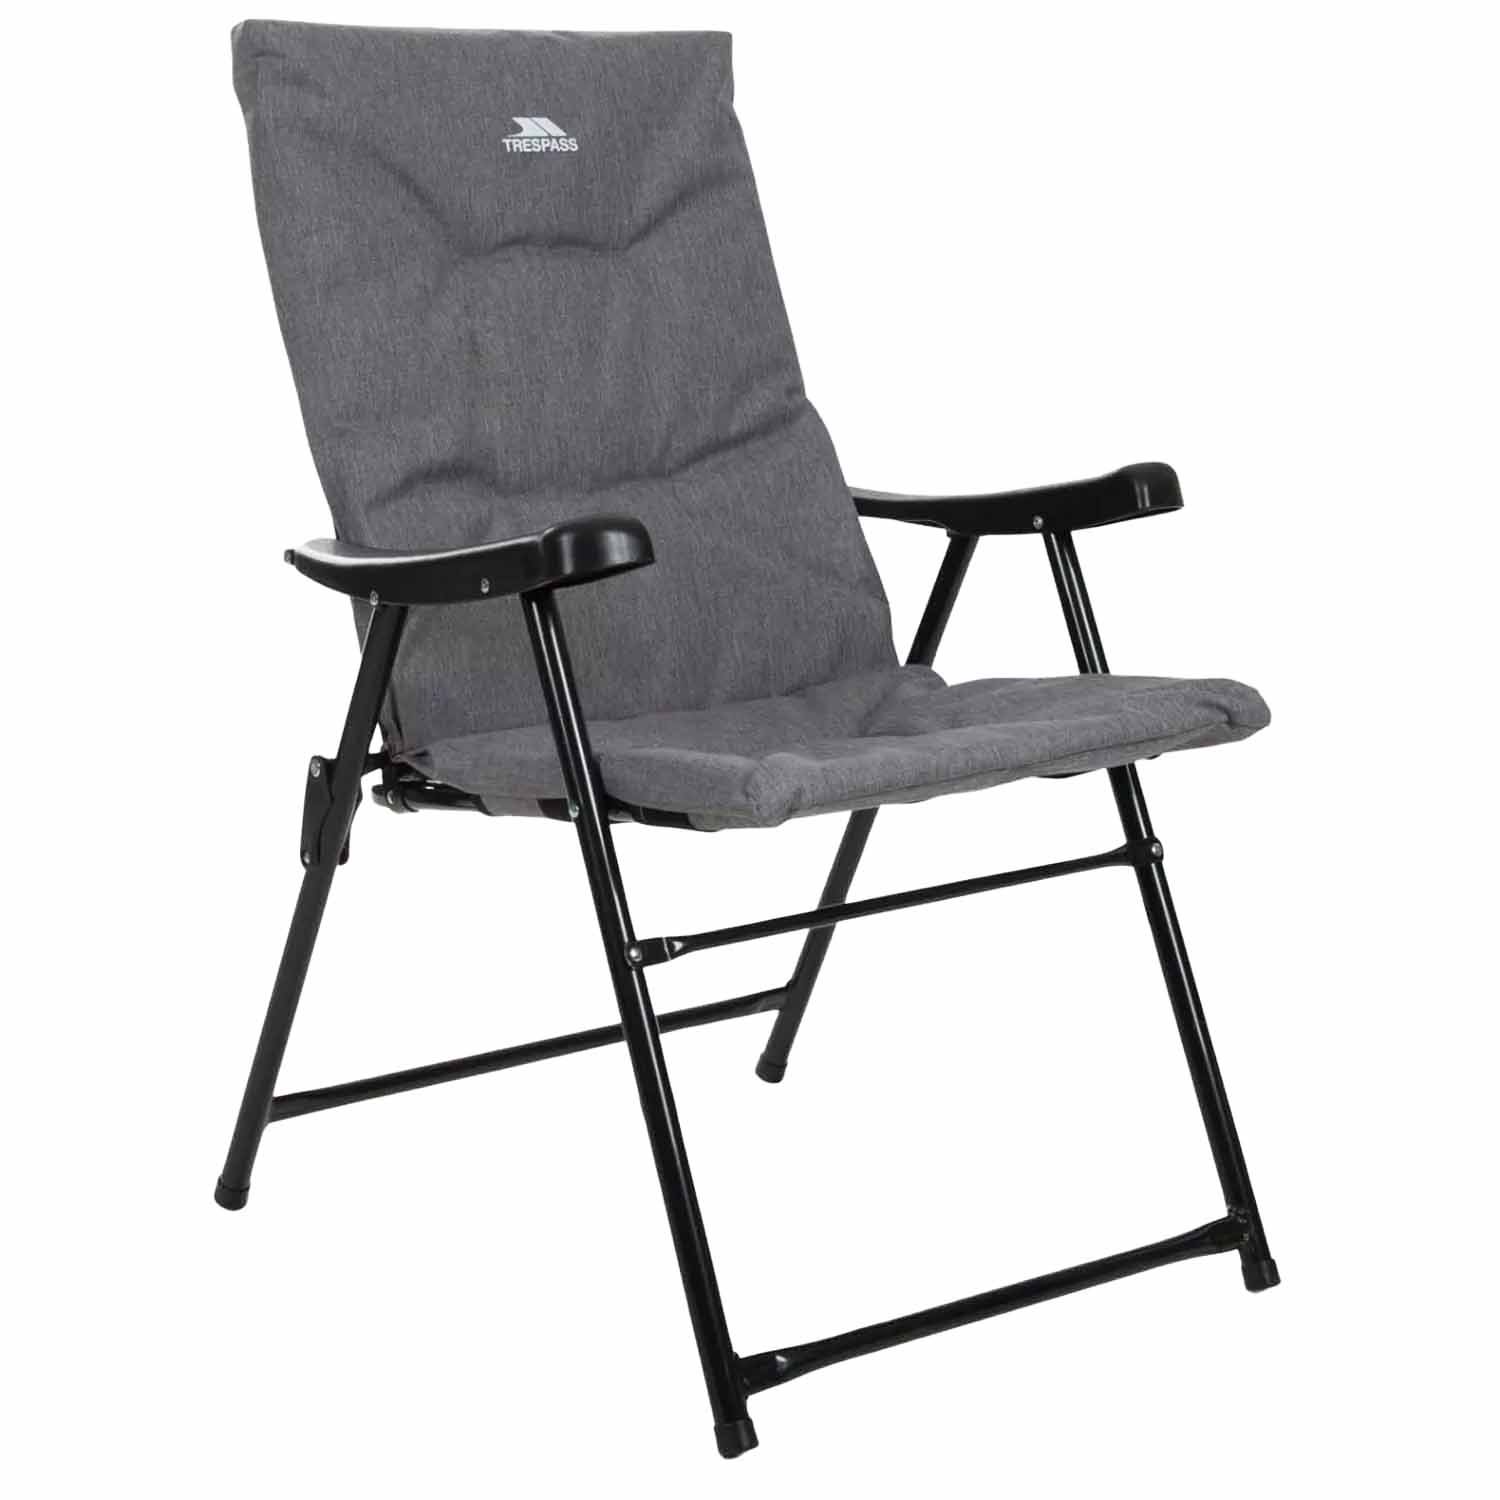 PADDY - PADDED CHAIR - Gri - 1